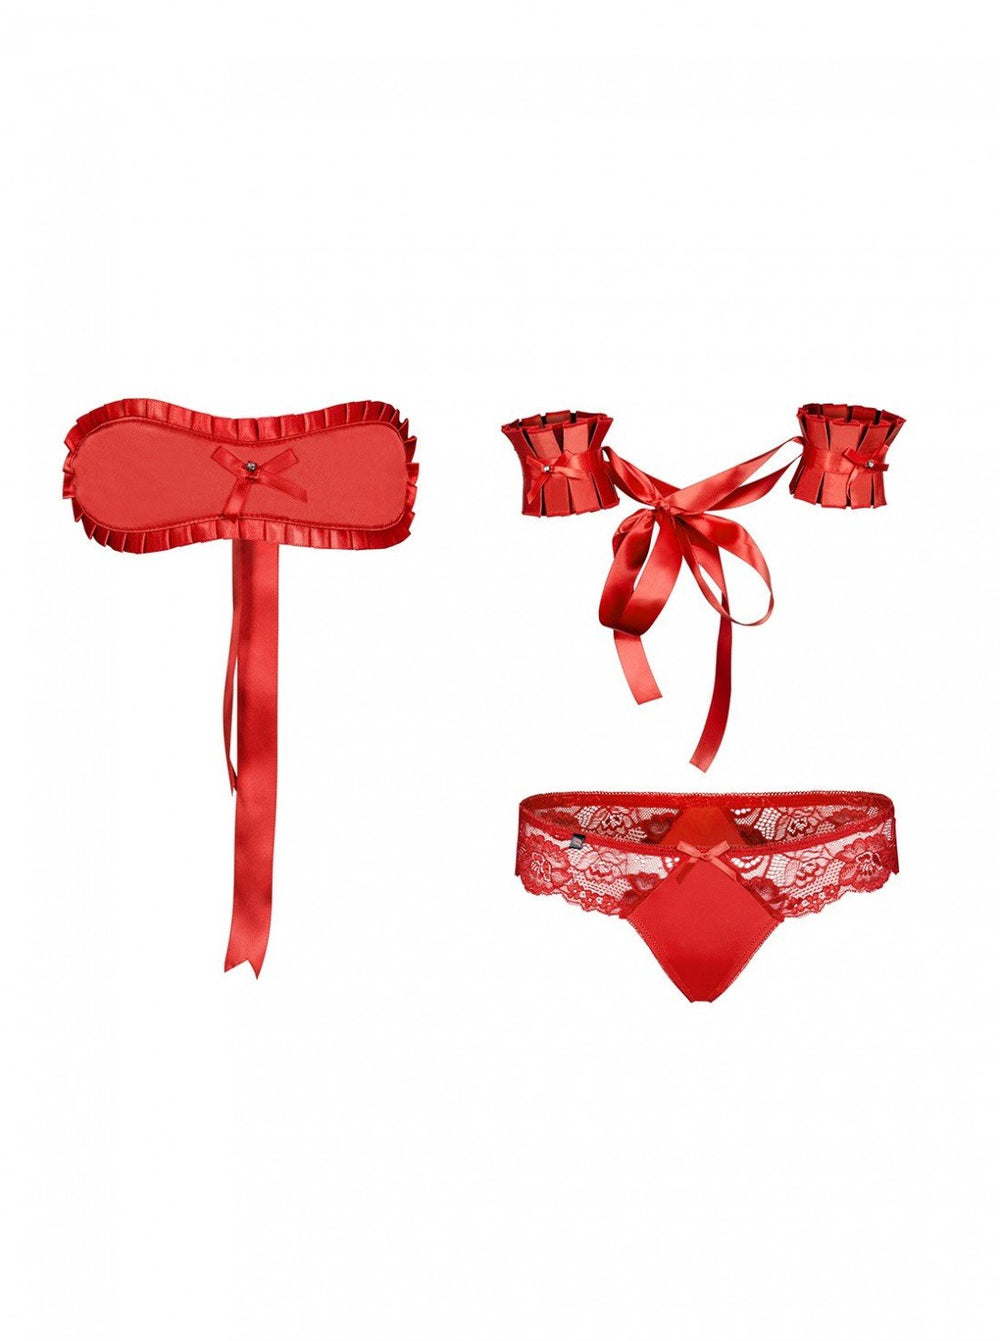 red satin mask and cuffs